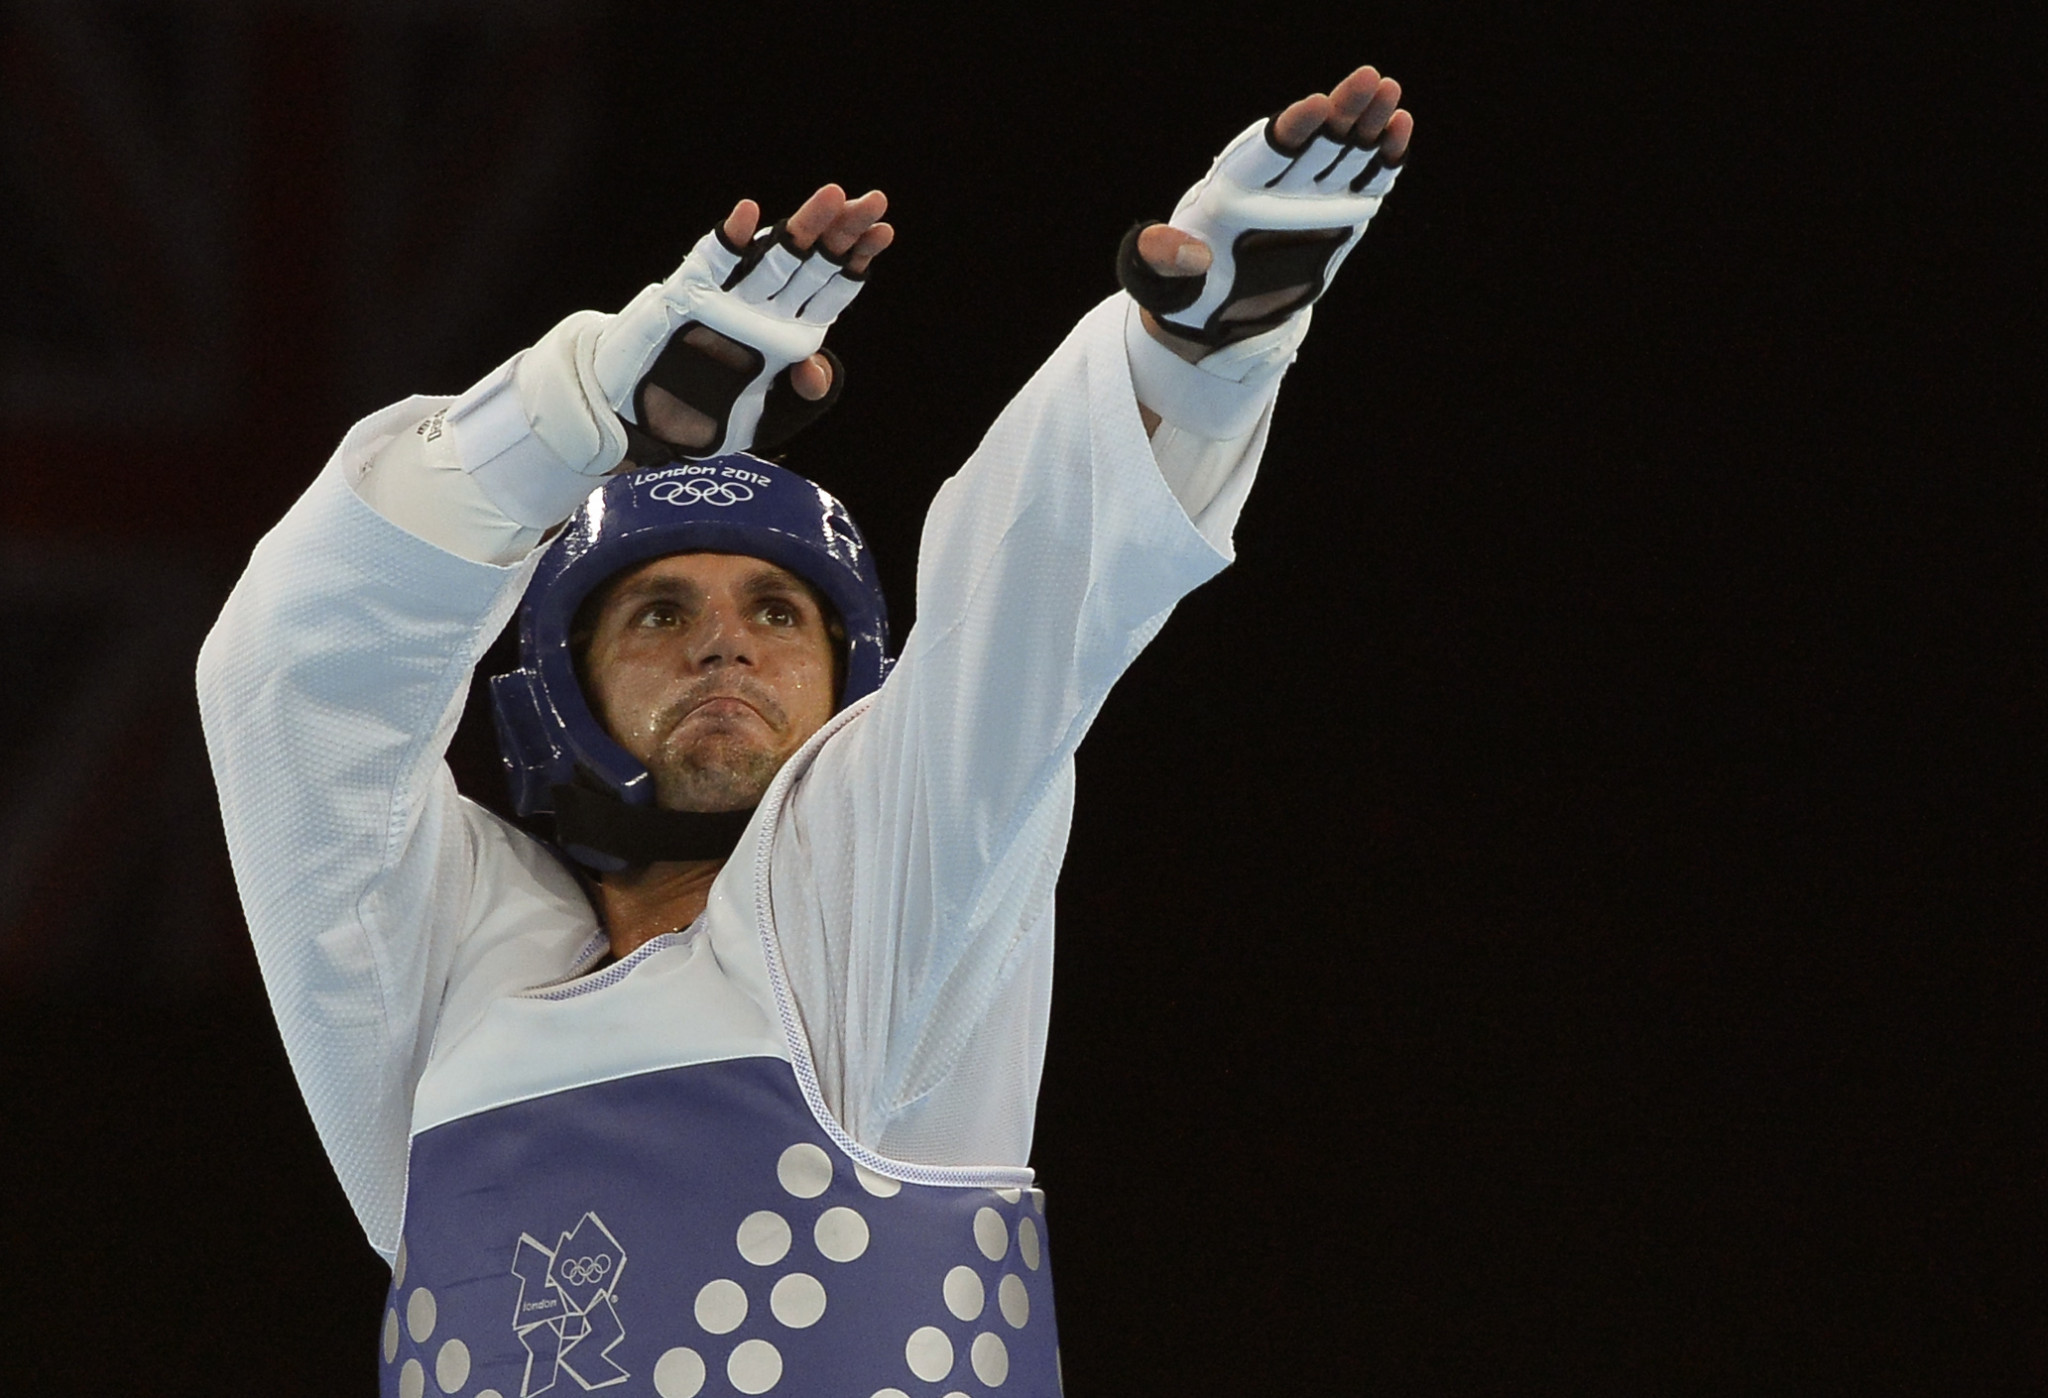 Carlo Molfetta was the first Italian to win an Olympic gold medal in taekwondo when he triumphed in the over-80kg category at London 2012 ©Getty Images